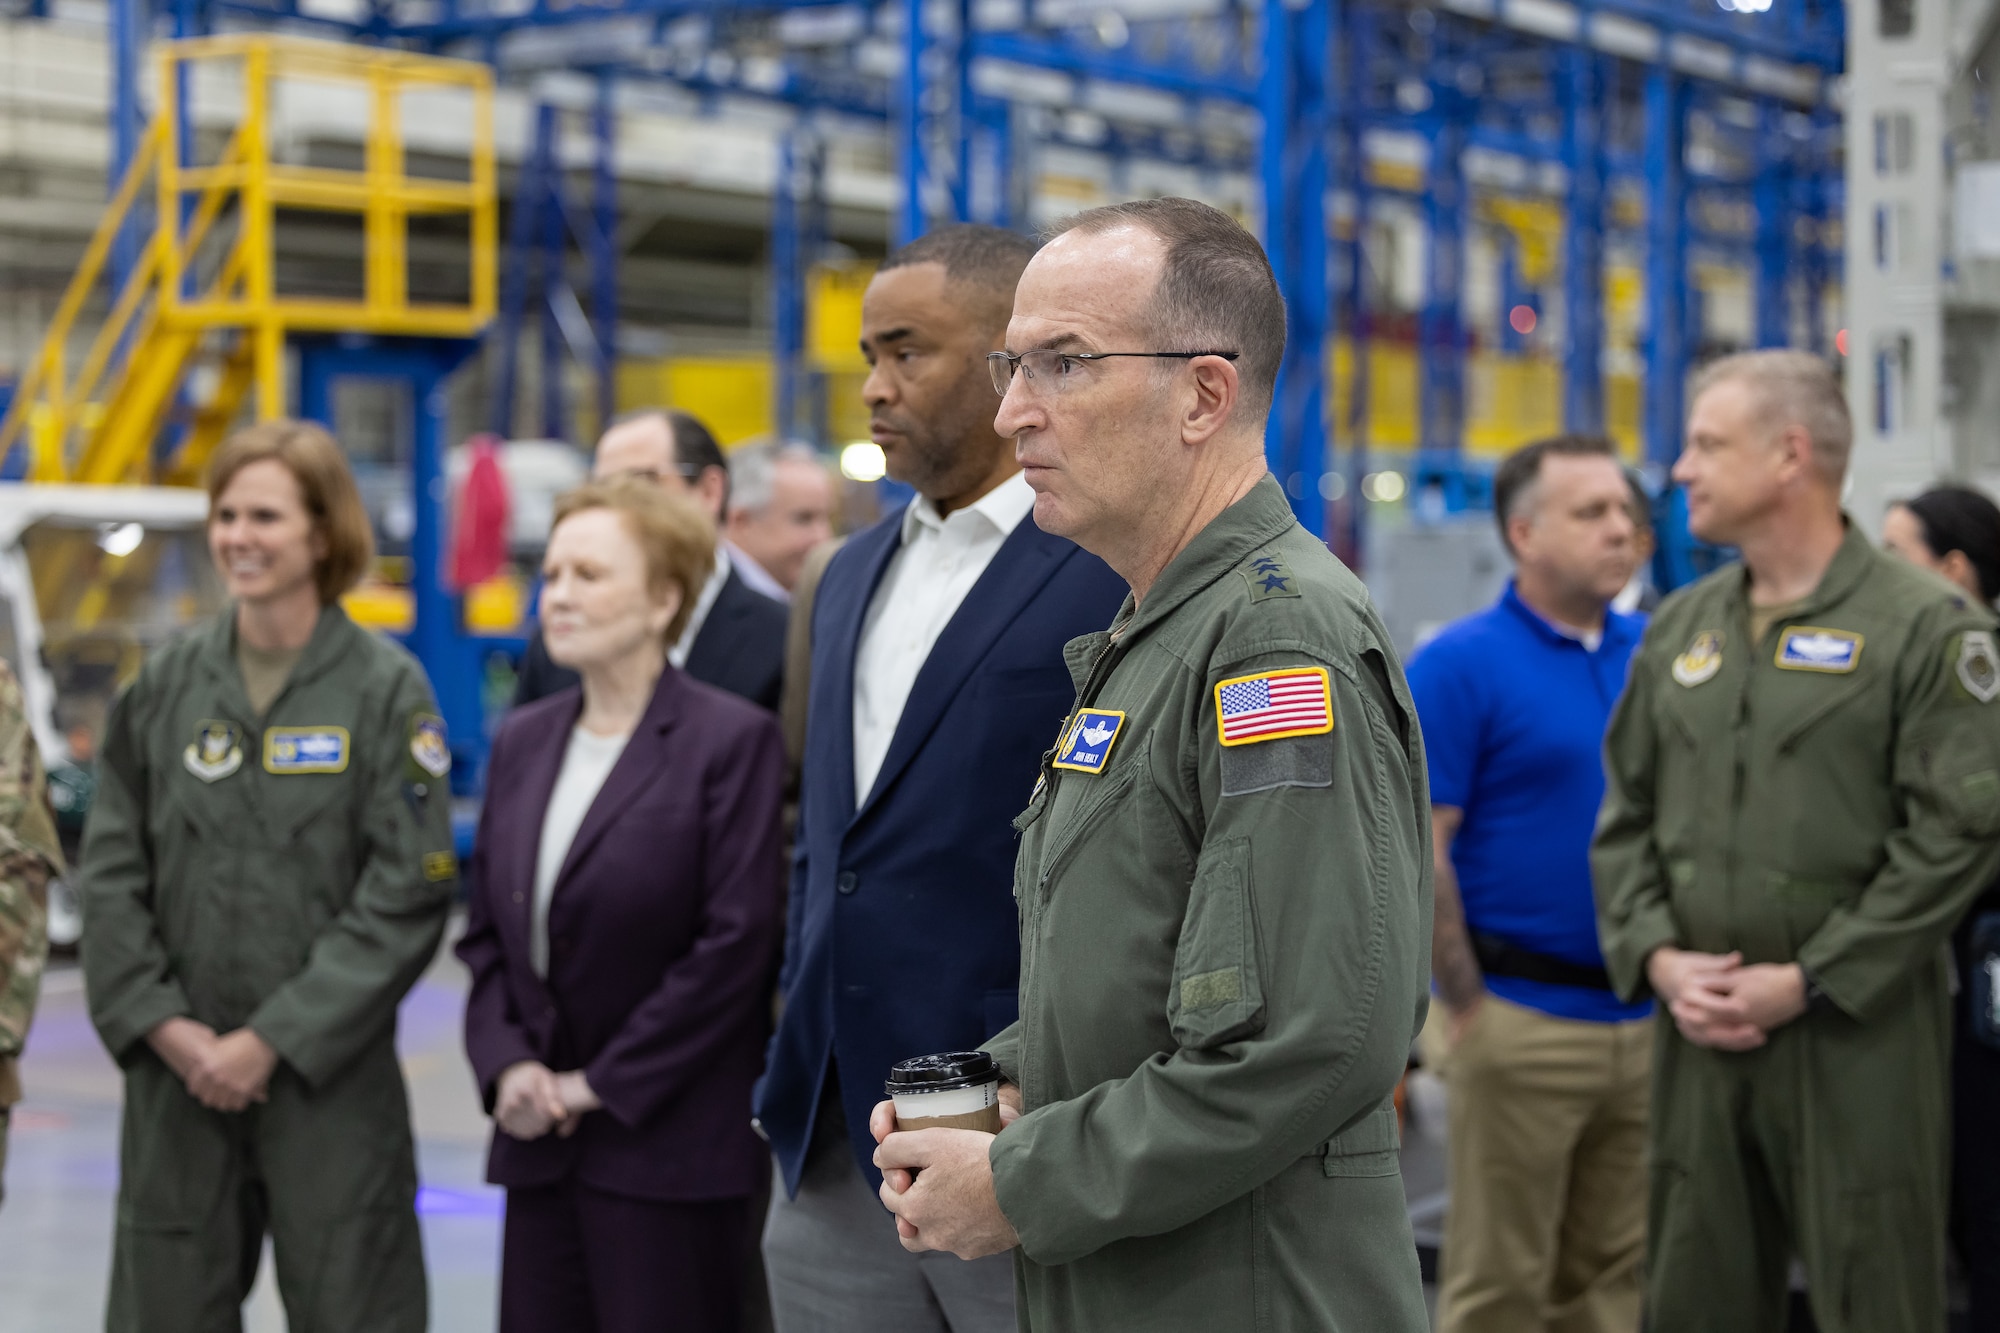 In the Lockheed Martin F-35 production line, high-level defense dialogues materialize into action as Lt. Gen. John Healy and Brig. Gen. Gina Sabric, alongside congressional representatives Kay Granger and Marc Veasey, inscribe their commitment onto the bulkhead of the first F-35 Lightning II for the 301st Fighter Wing. This signing marks not just a transfer of technology but a strategic advance, reinforcing the Air Force Reserve Command's future readiness. (Photos courtesy of Lockheed Martin Aeronautics Company)